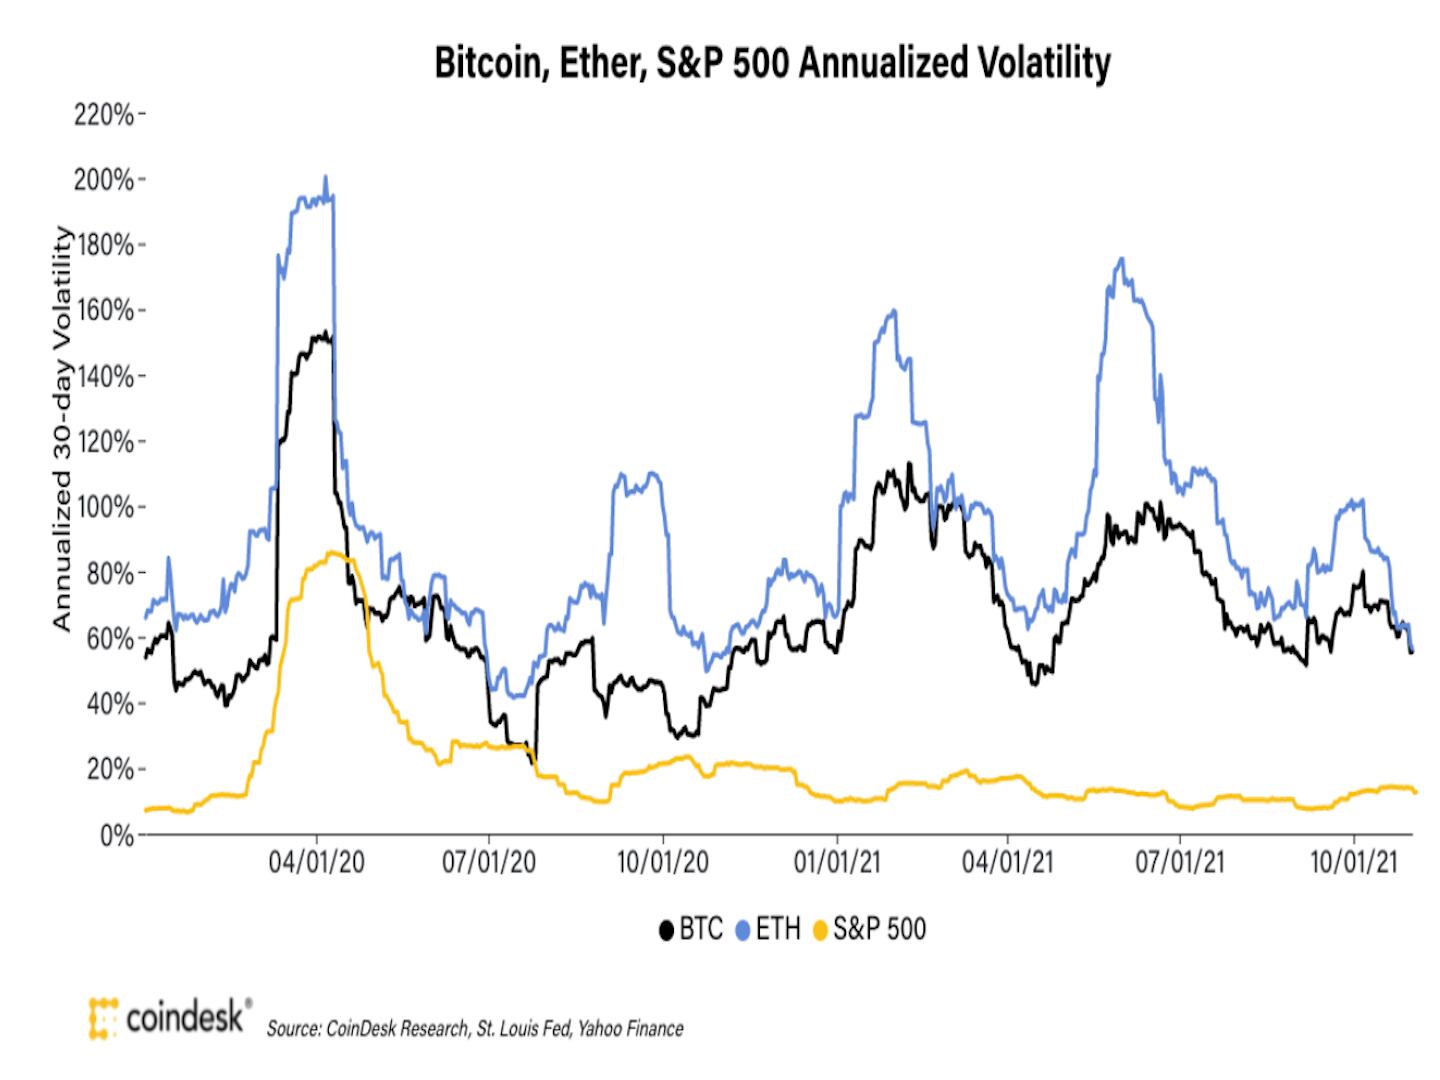 Bitcoin, ether, S&P 500 annualized volatility (CoinDesk Research, St. Louis Fed, Yahoo Finance)